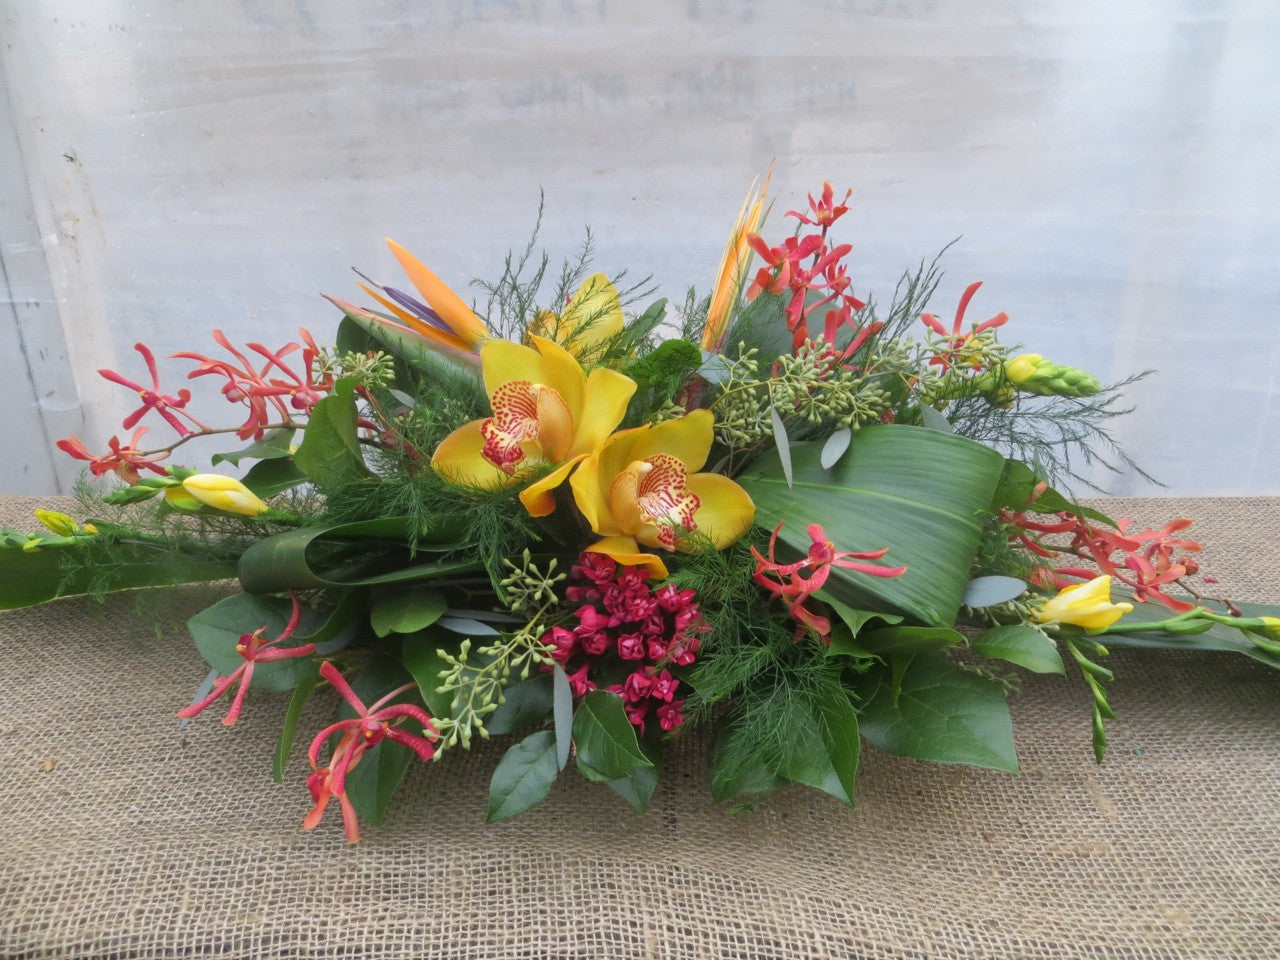 Naples: Thanksgiving floral centerpiece with Cymbidium Orchids, Birds of Paradise, and Aranthera Orchids | Michler's Florist